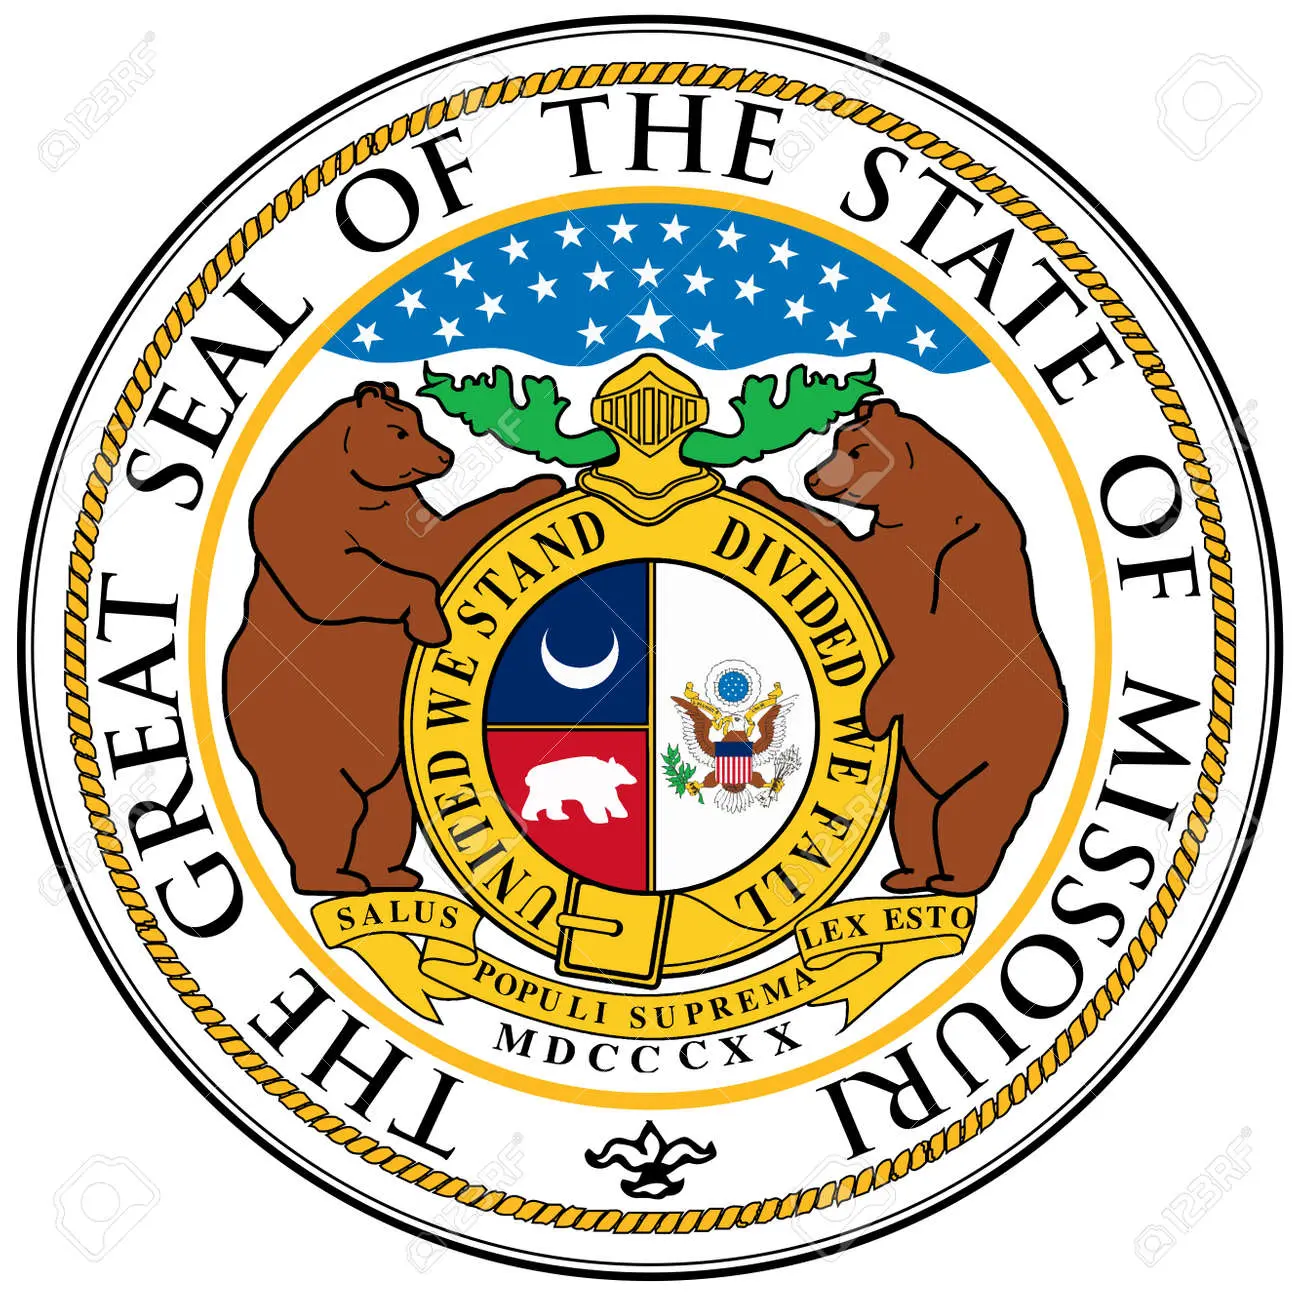 great-seal-of-the-state-of-missouri